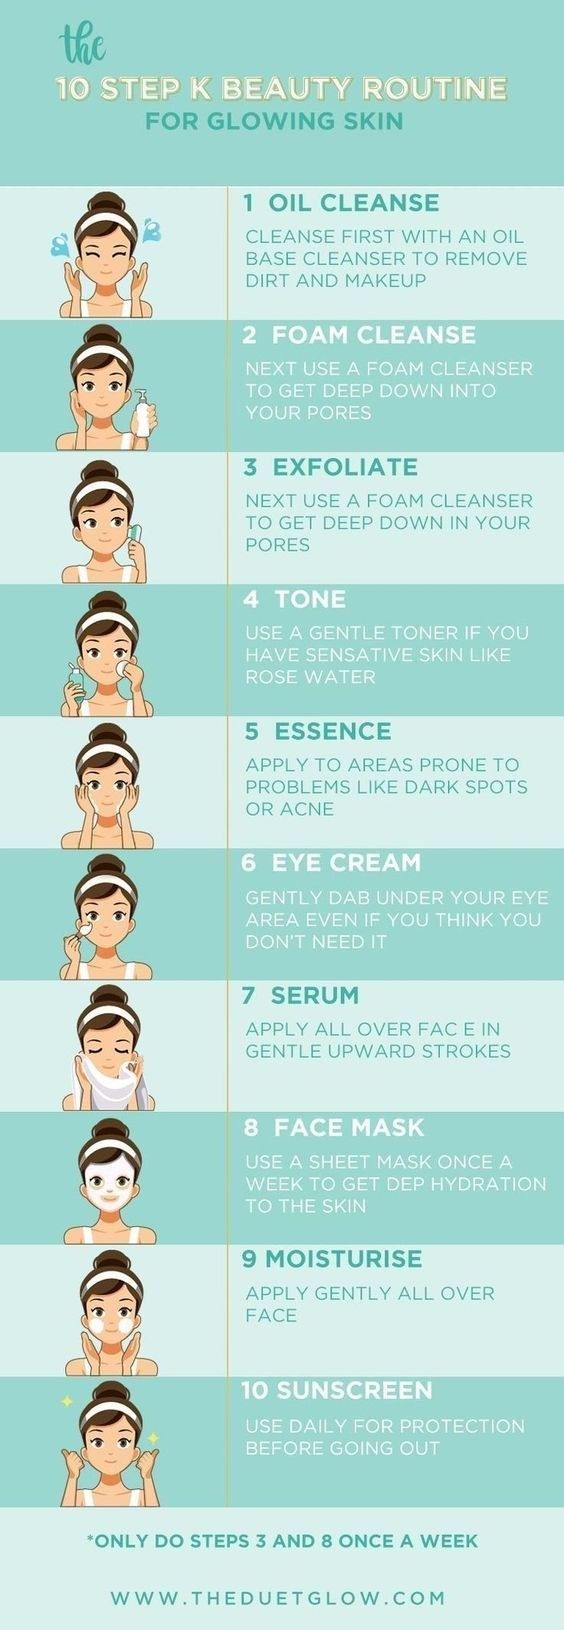 16 Skincare Cheat Sheets That Are Actually Useful - 16 Skincare Cheat Sheets That Are Actually Useful -   Hair & Beauty